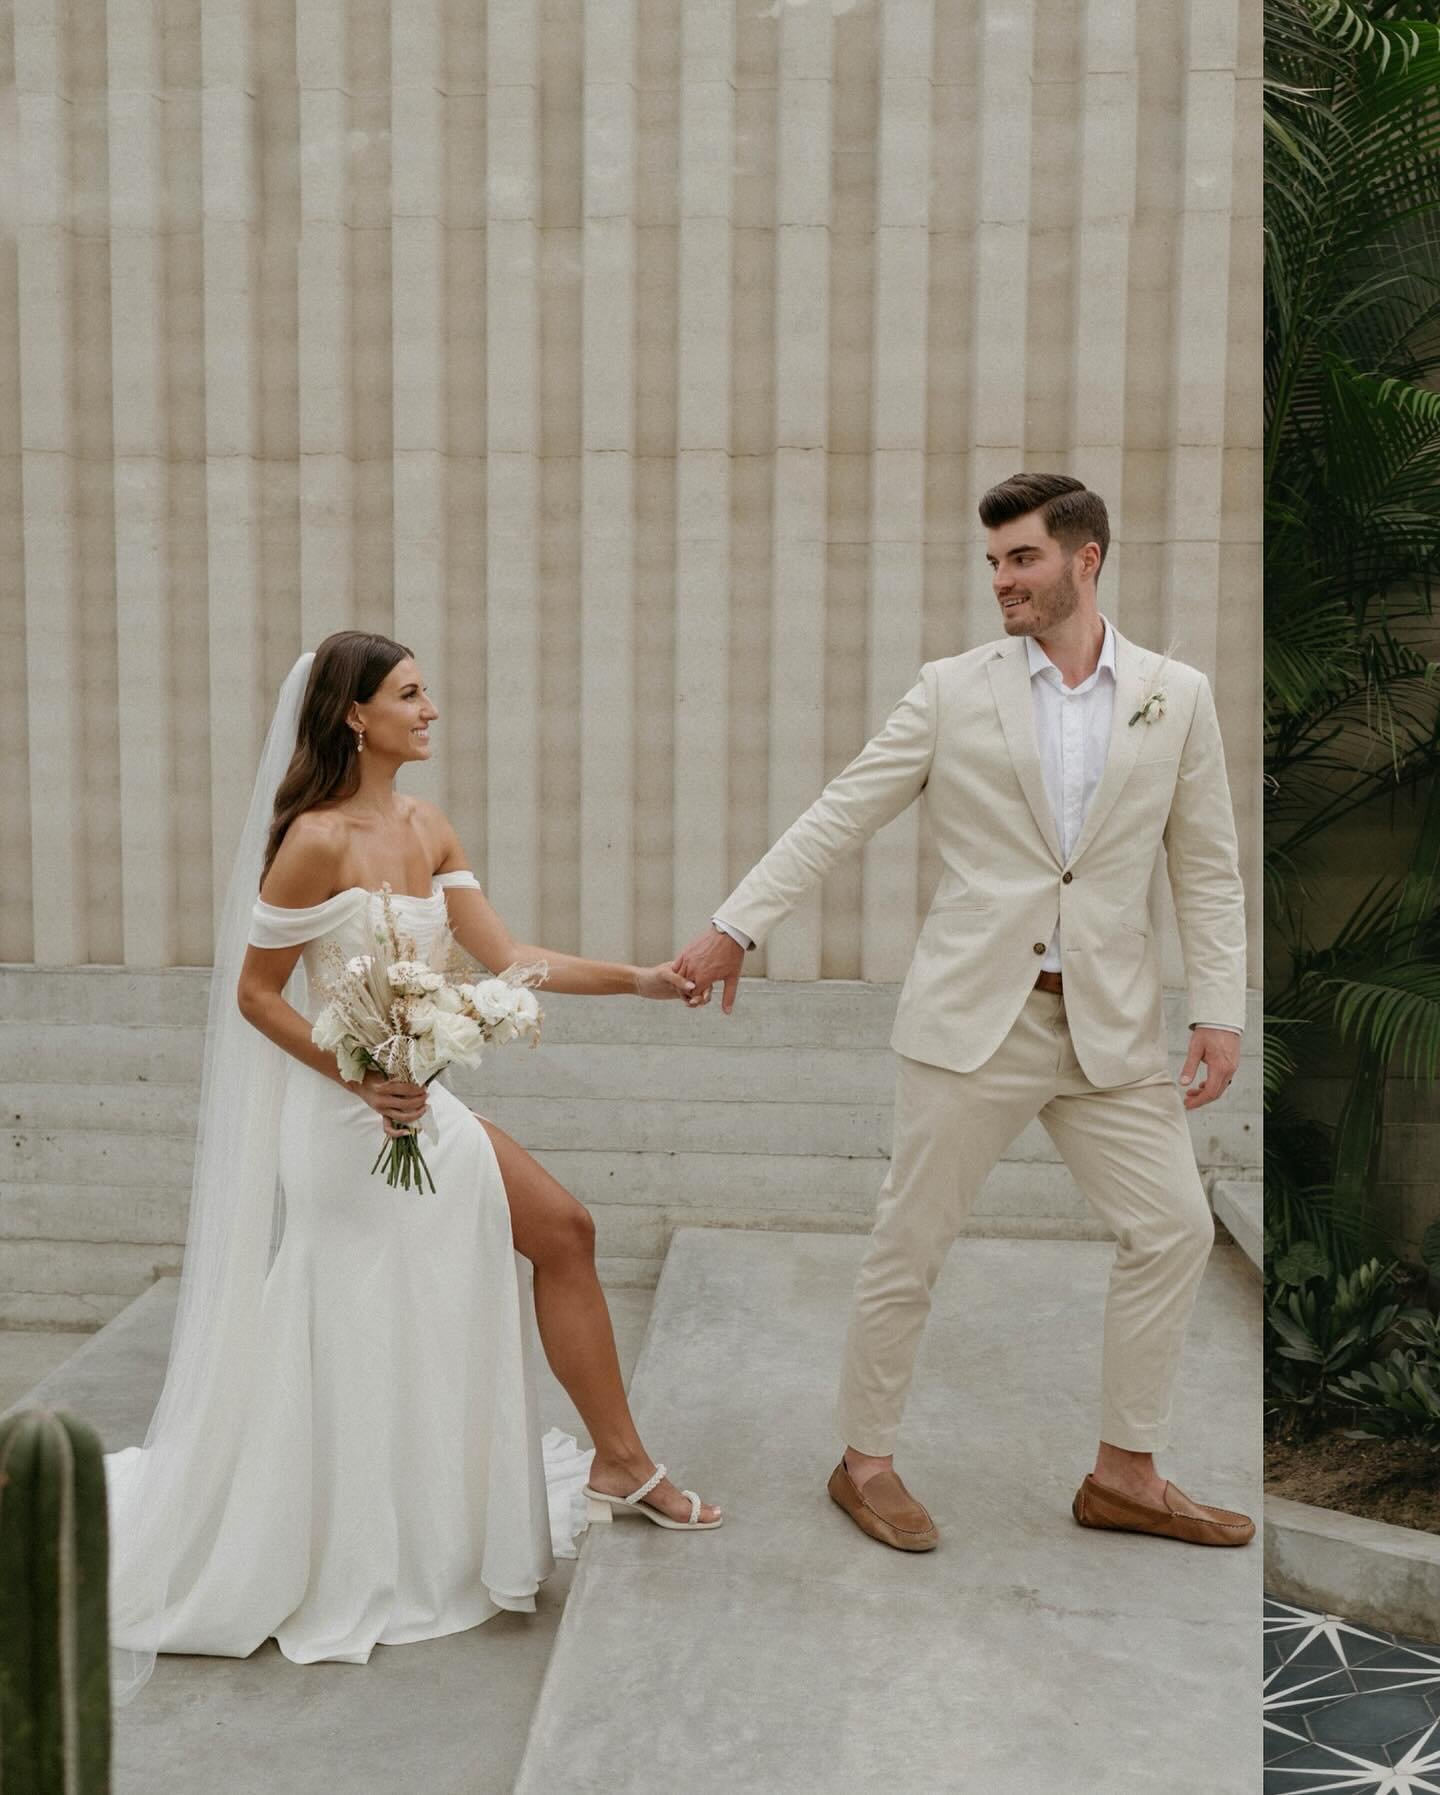 The Parkers in Cabo 🕊️🌴from here on out can every wedding i shoot be a vacation please?! @gael.events @acre.wedding @blancbridalsaloncabo 
#jennifernoellephotography #firstandlasts #belovedstories  #palmspringsweddingphotographer #rawandreallove #l